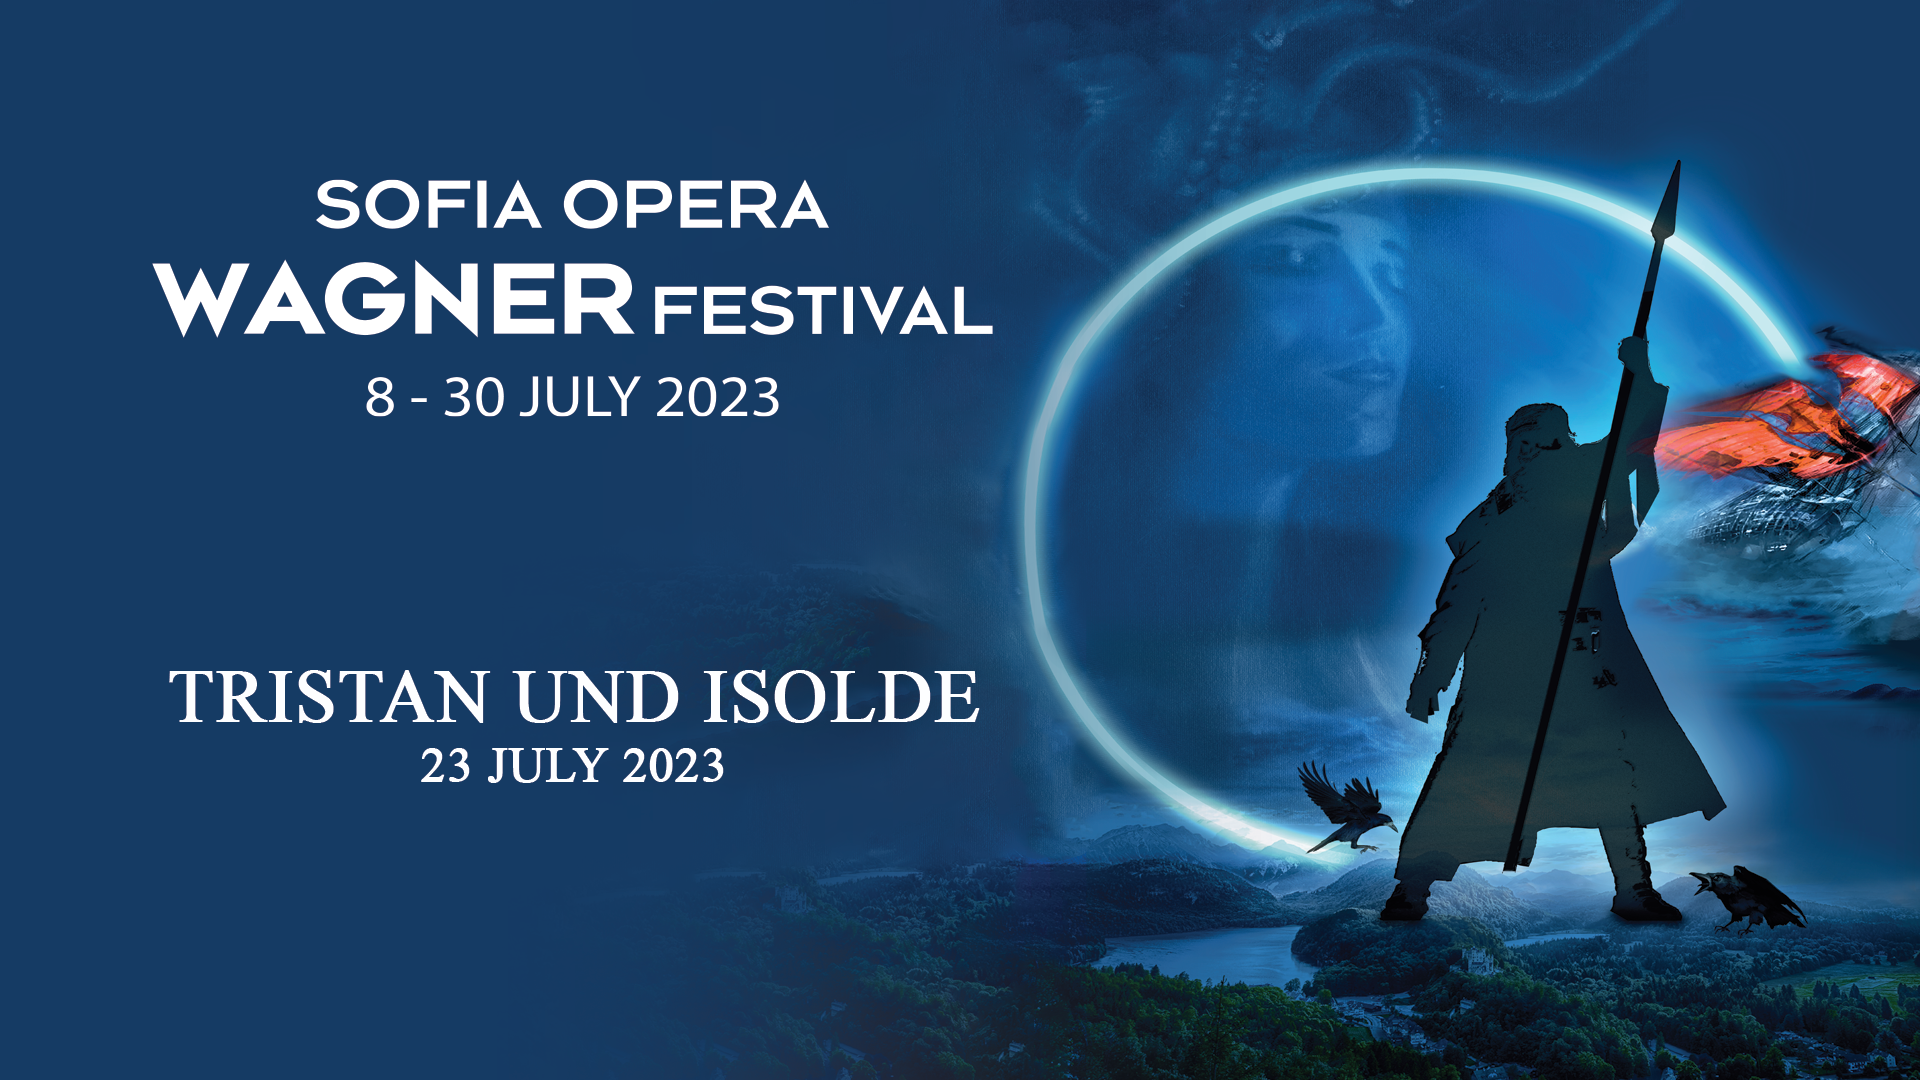 "Tristan und Isolde" – the magic of love in a stunning production